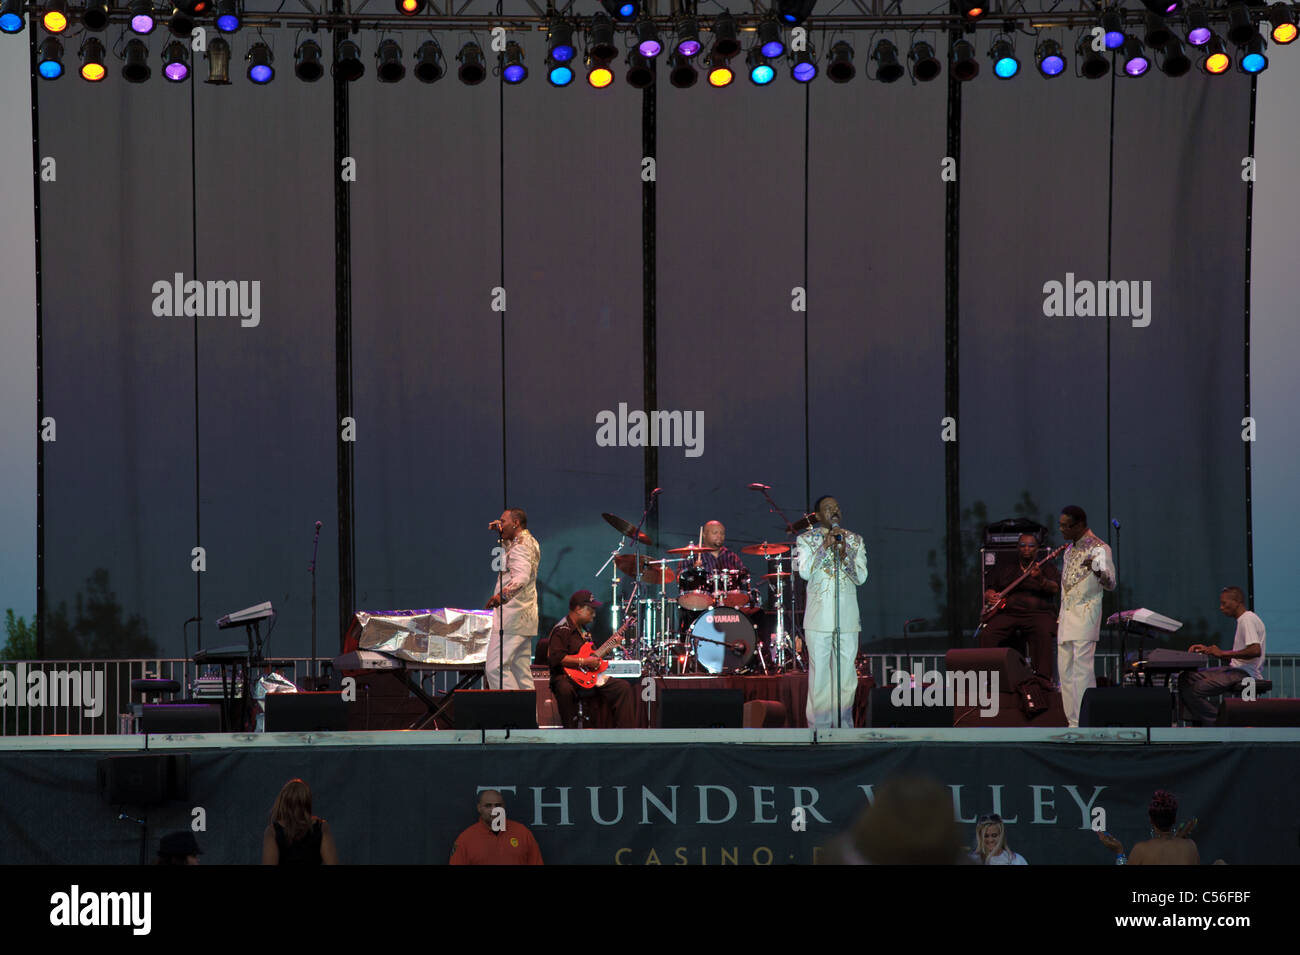 Sacramento, CA - July 7: 70's bands perform onstage in Super 70's Soul Jam concert at Thunder Valley Casino and Resort Stock Photo